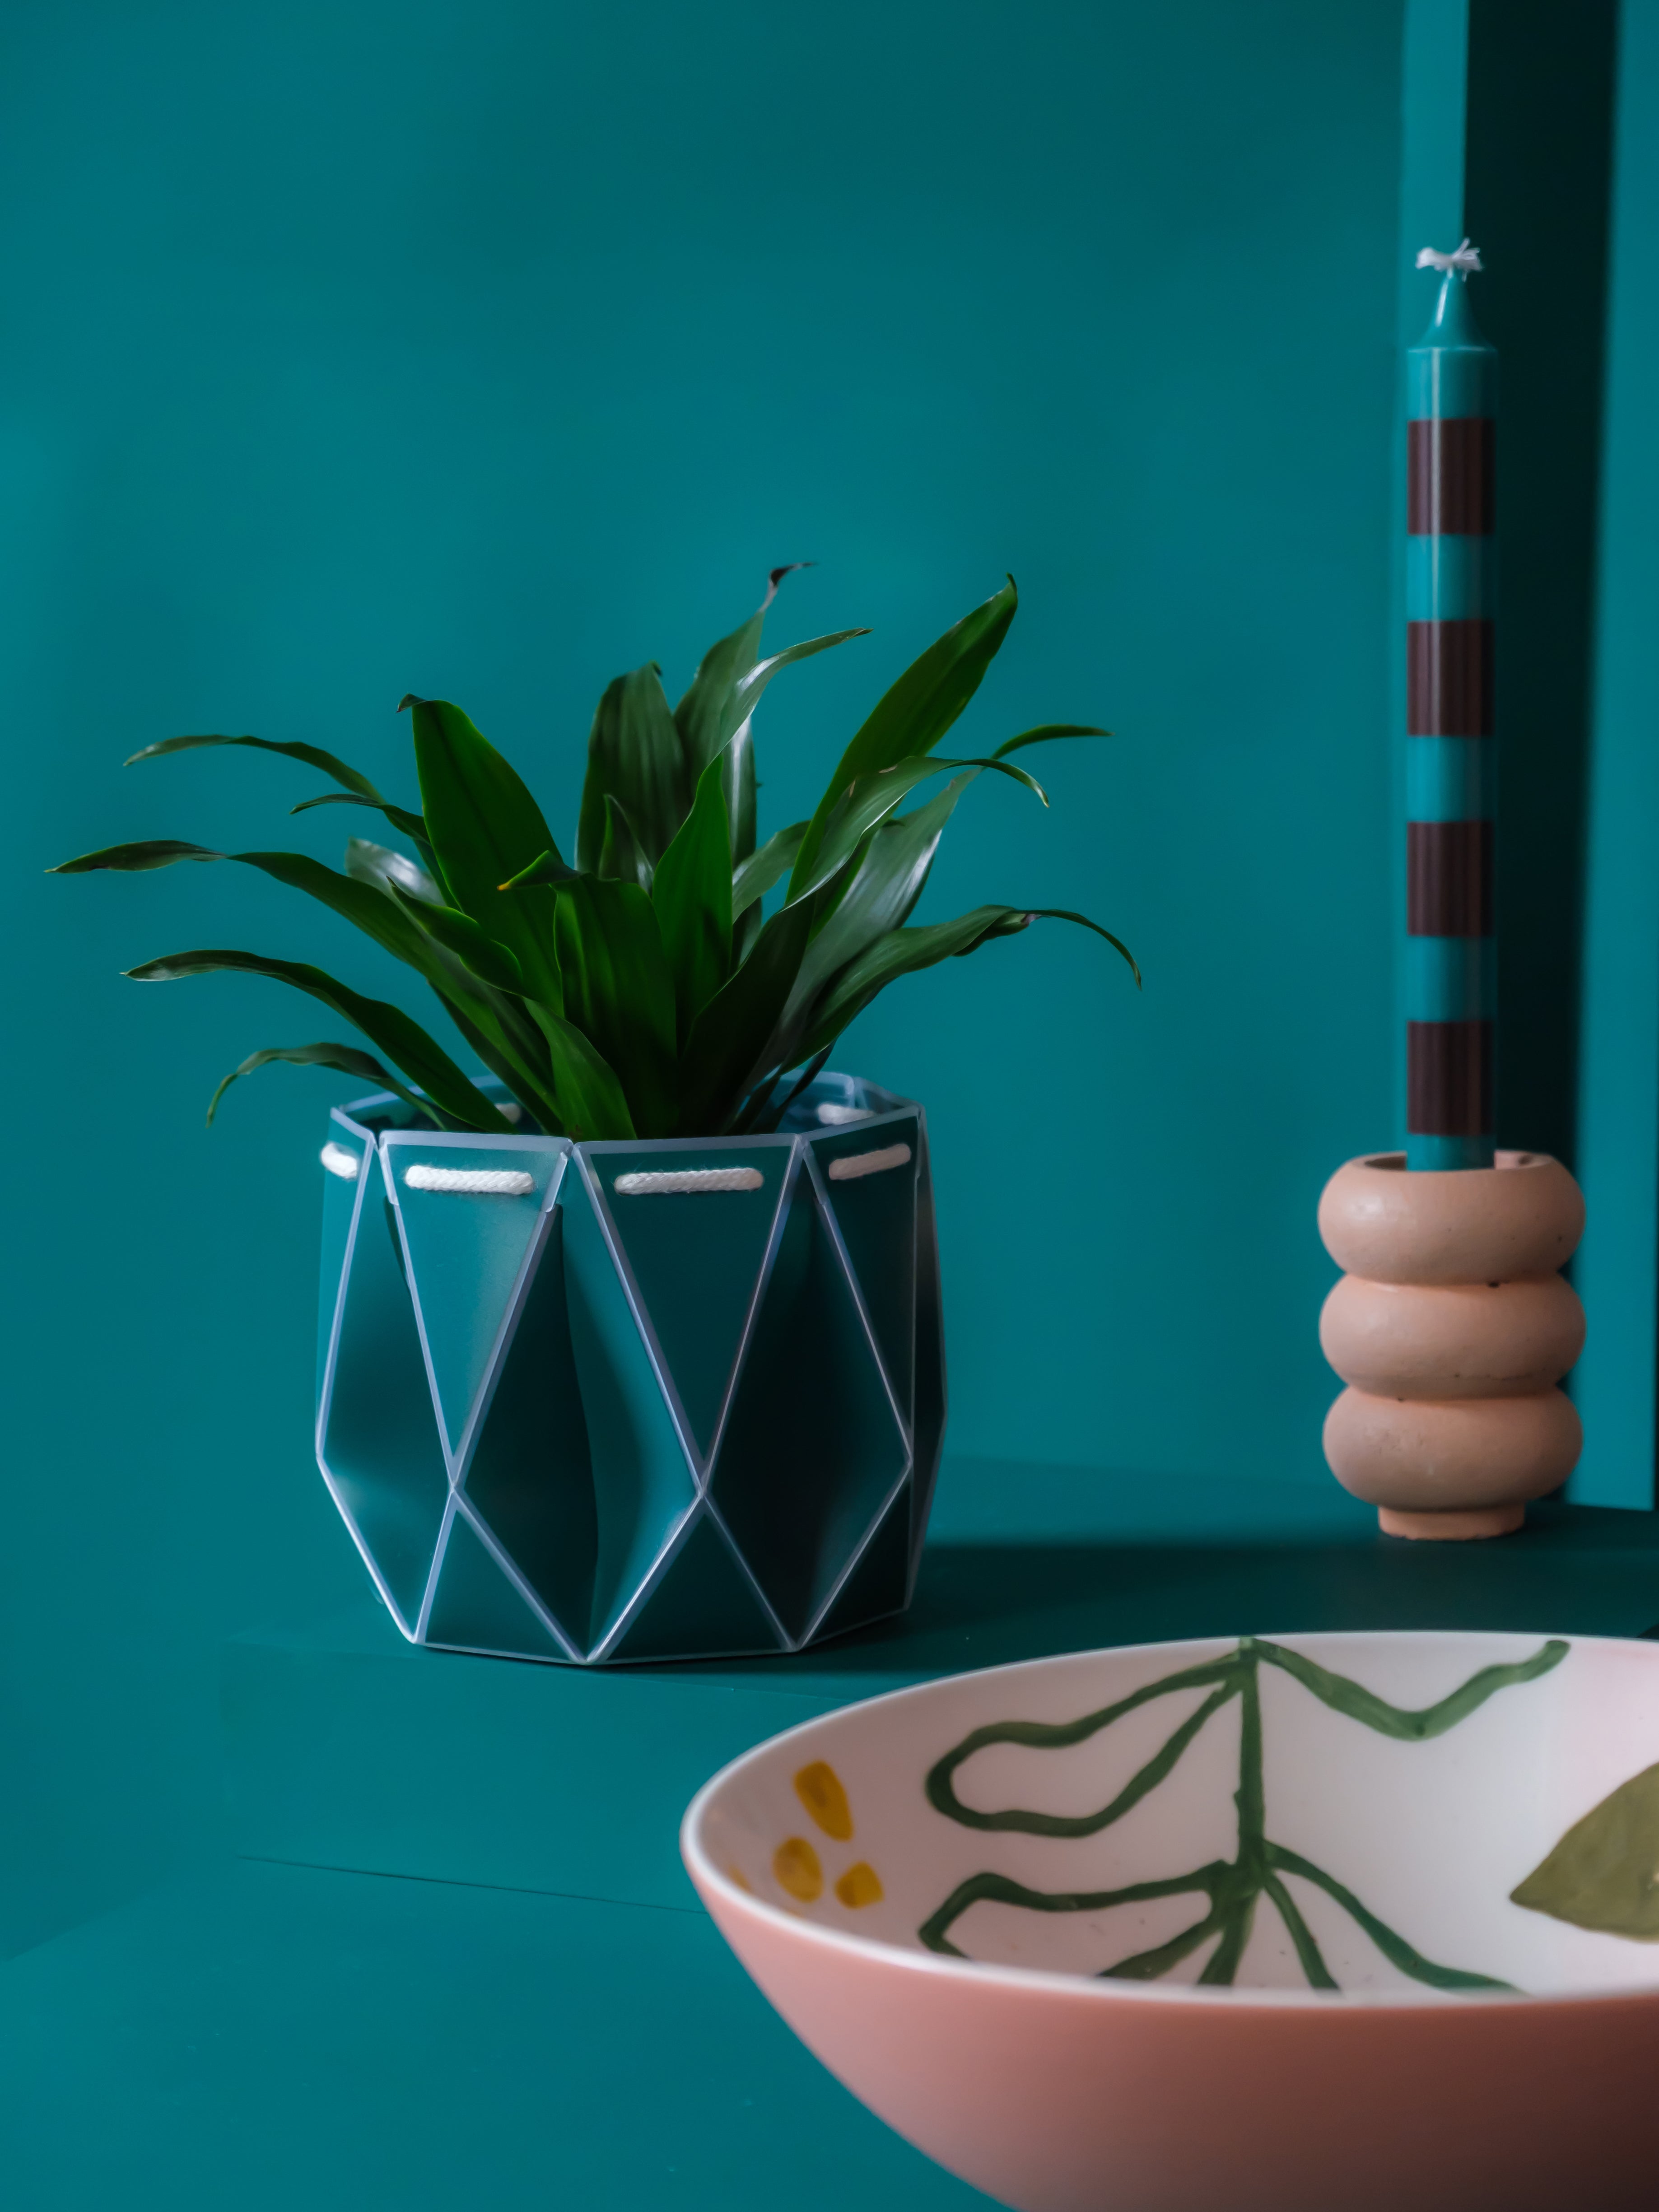 Origami planter which is self-watering for your plants. Arranged with a bowl and candle.